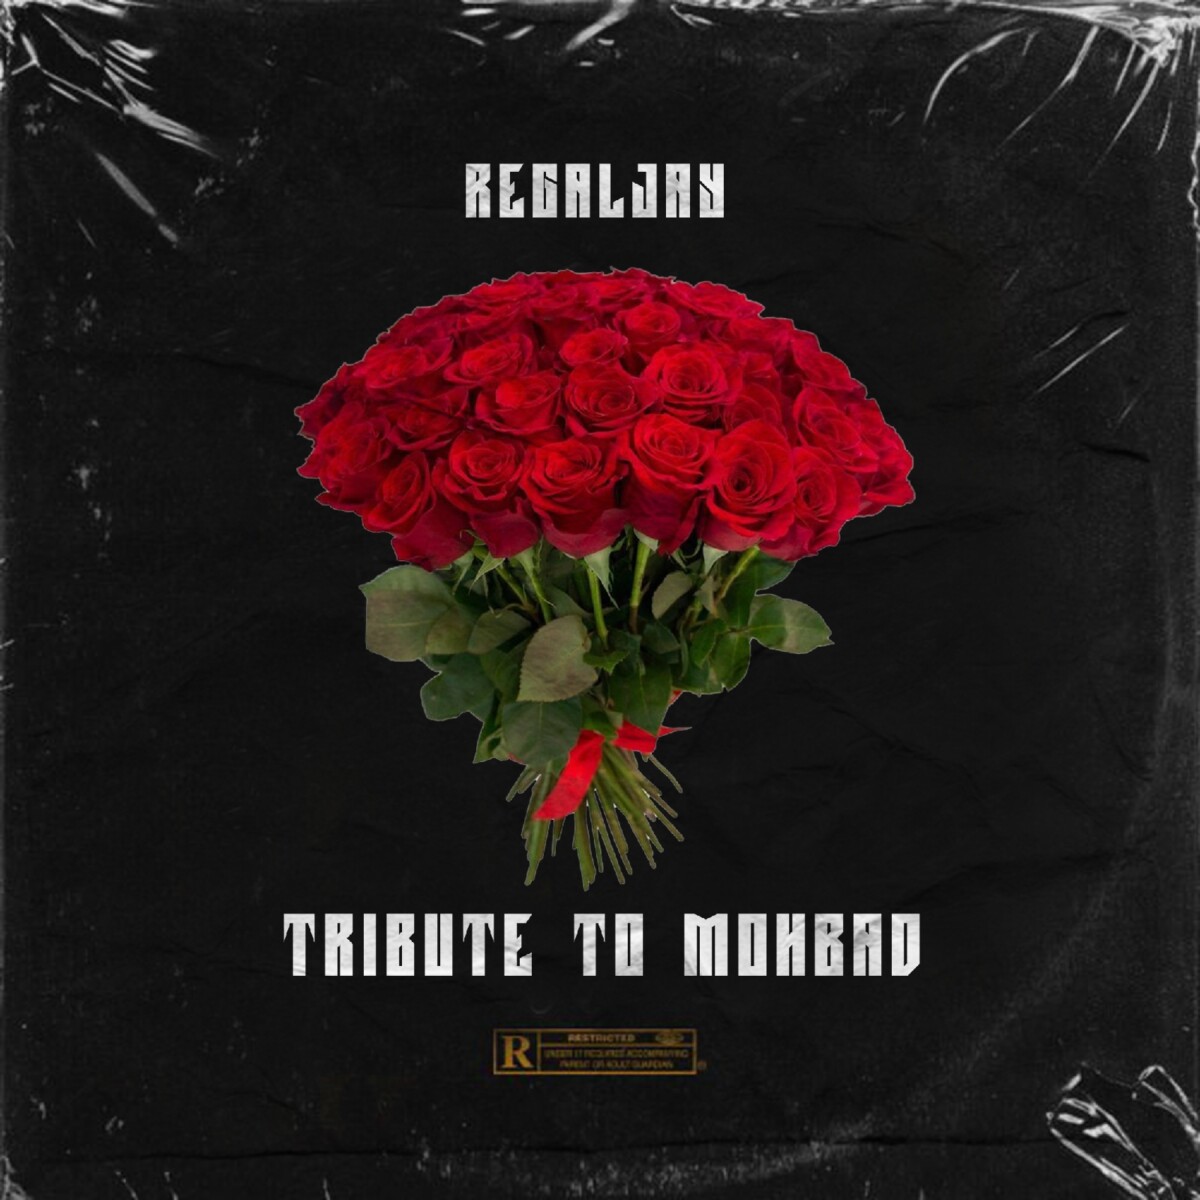 RegalJay – Tribute to MohBad 